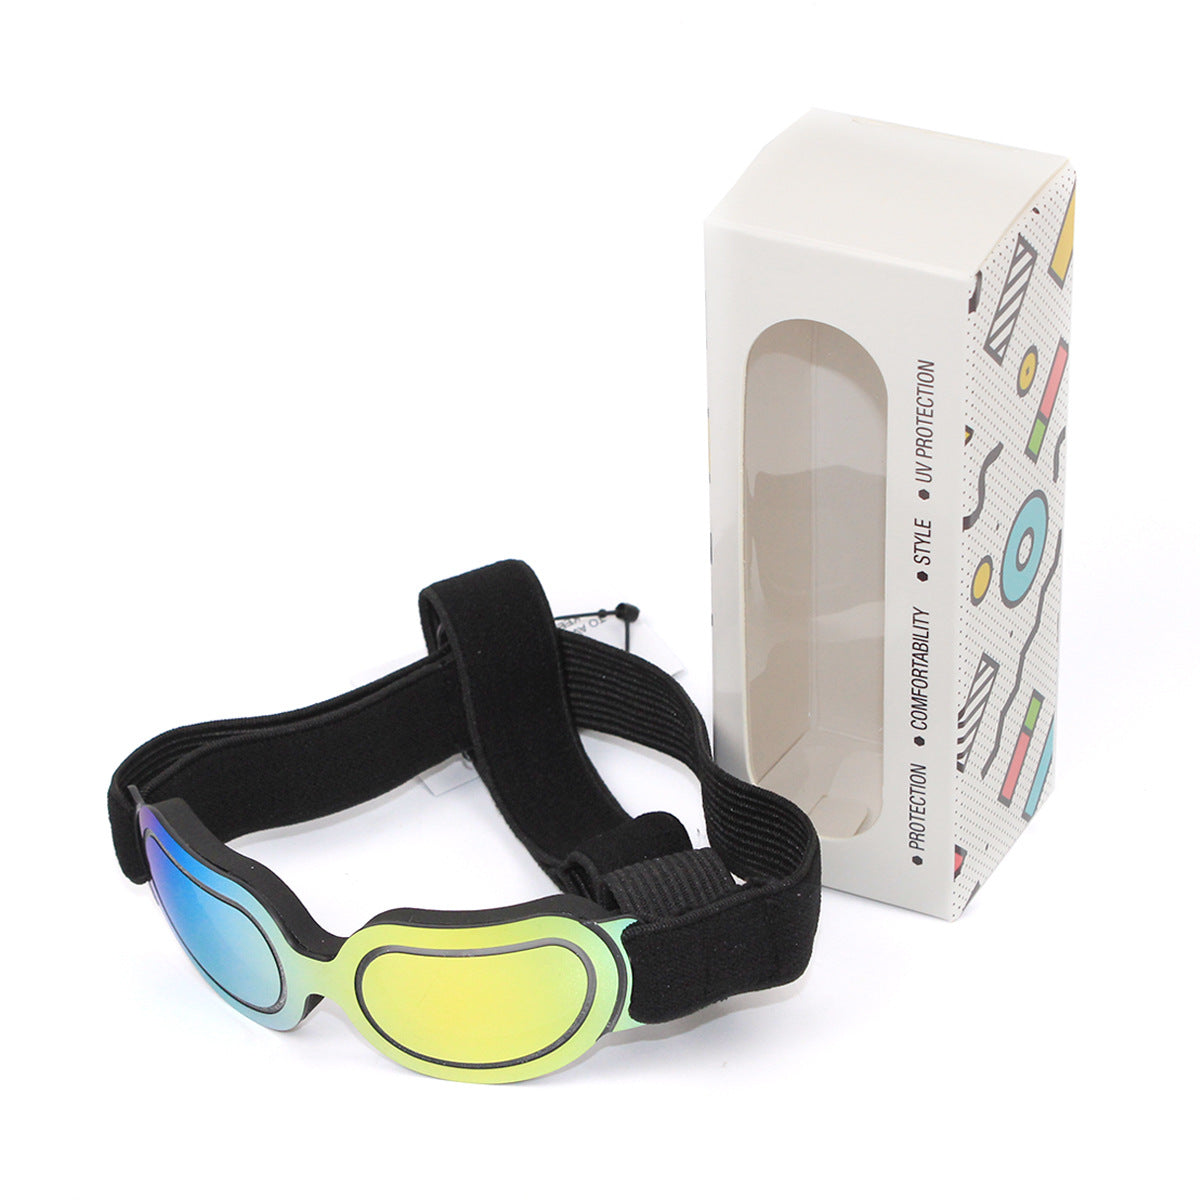 Uv Protection Colorful Sunglasses For Puppies